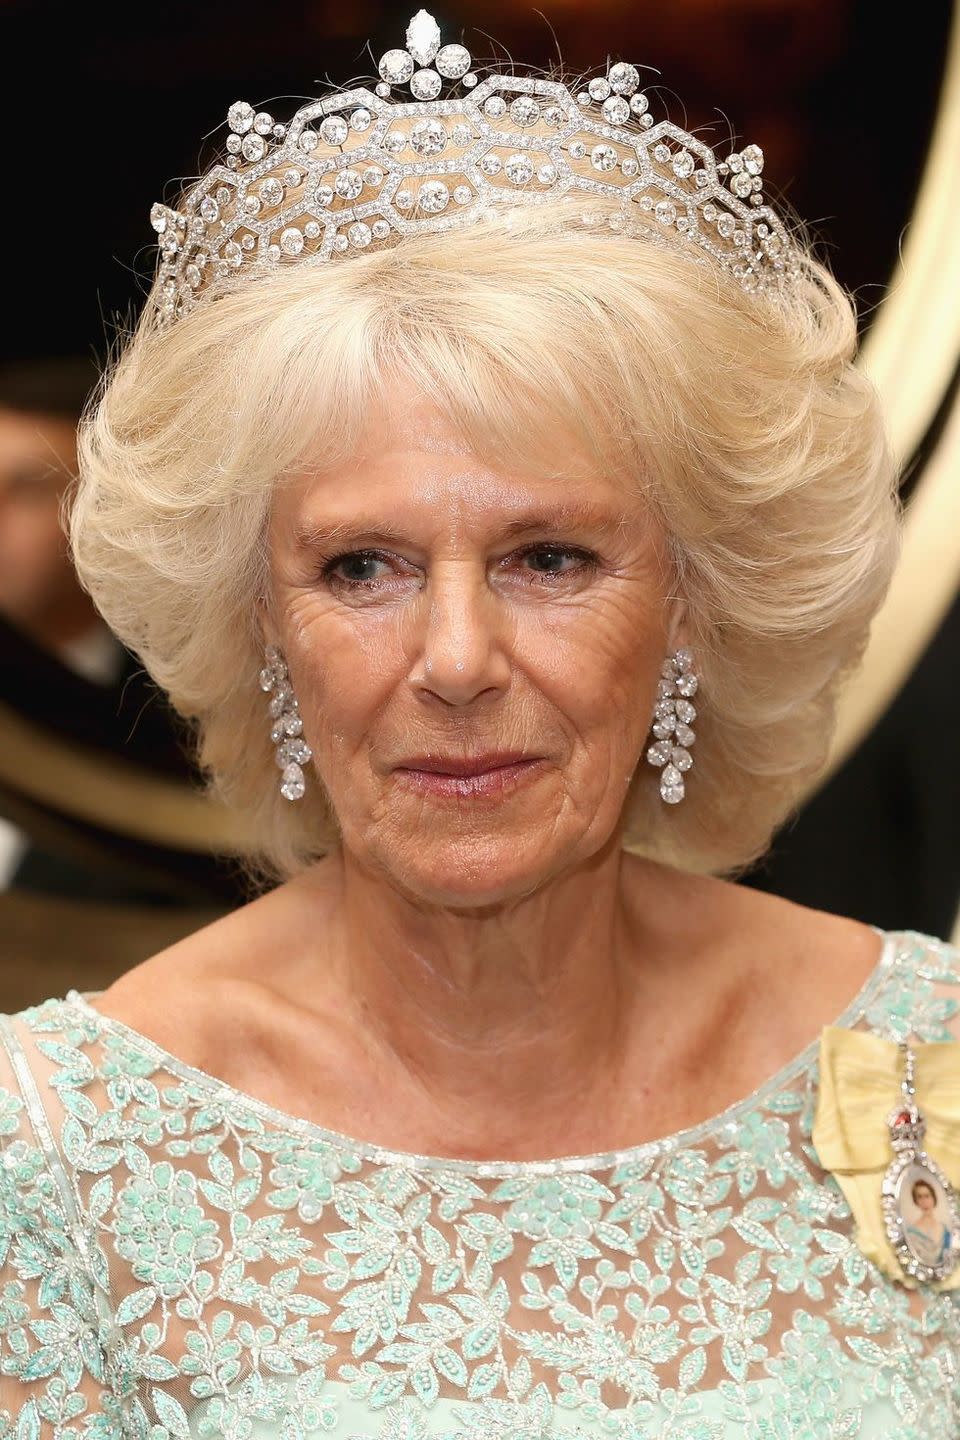 <p>The Duchess allowed the Greville Tiara and her statement earrings to take center stage, forgoing a necklace, for a CHOGM Dinner in Sri Lanka.<br></p>